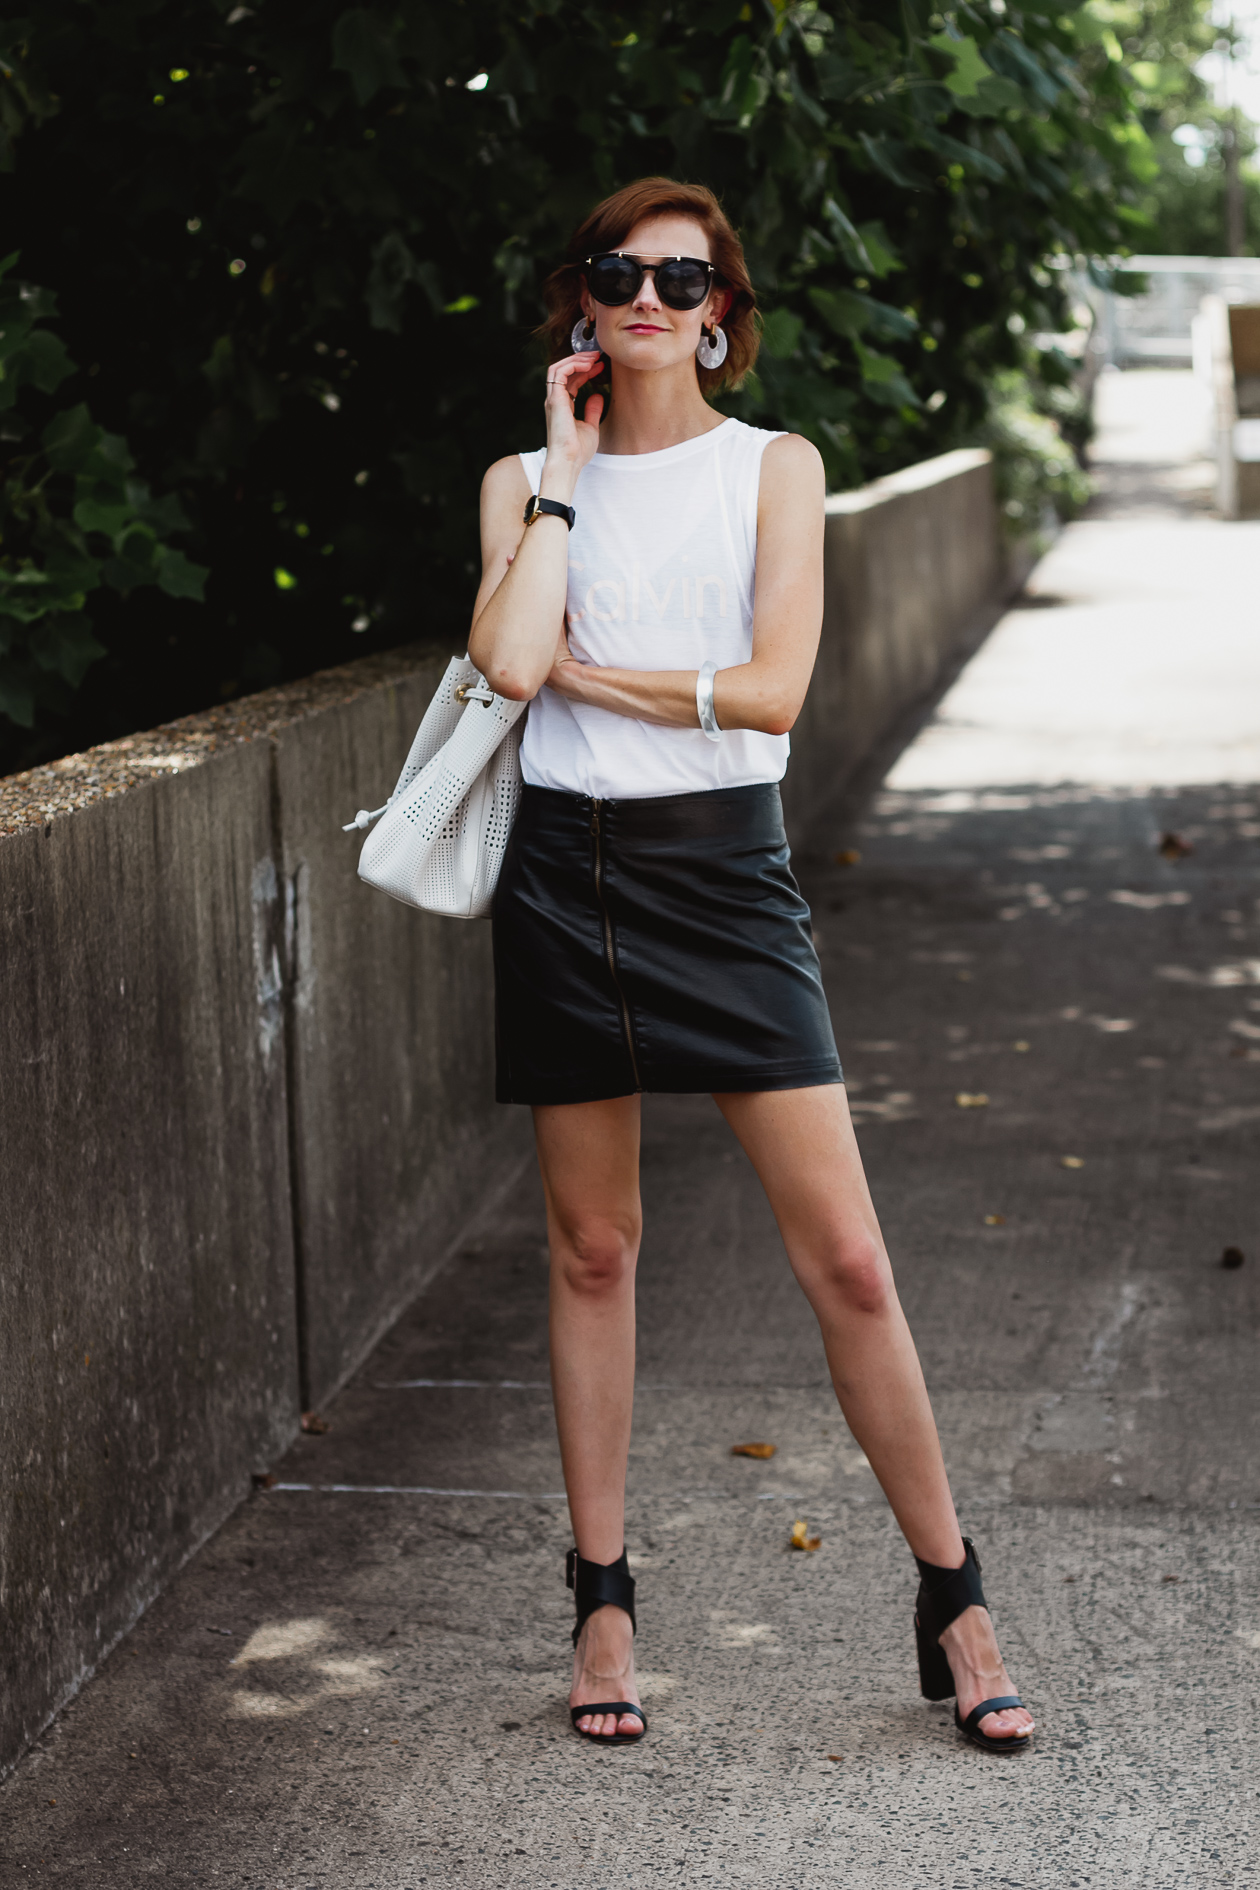 Calvin Klein top and leather skirt